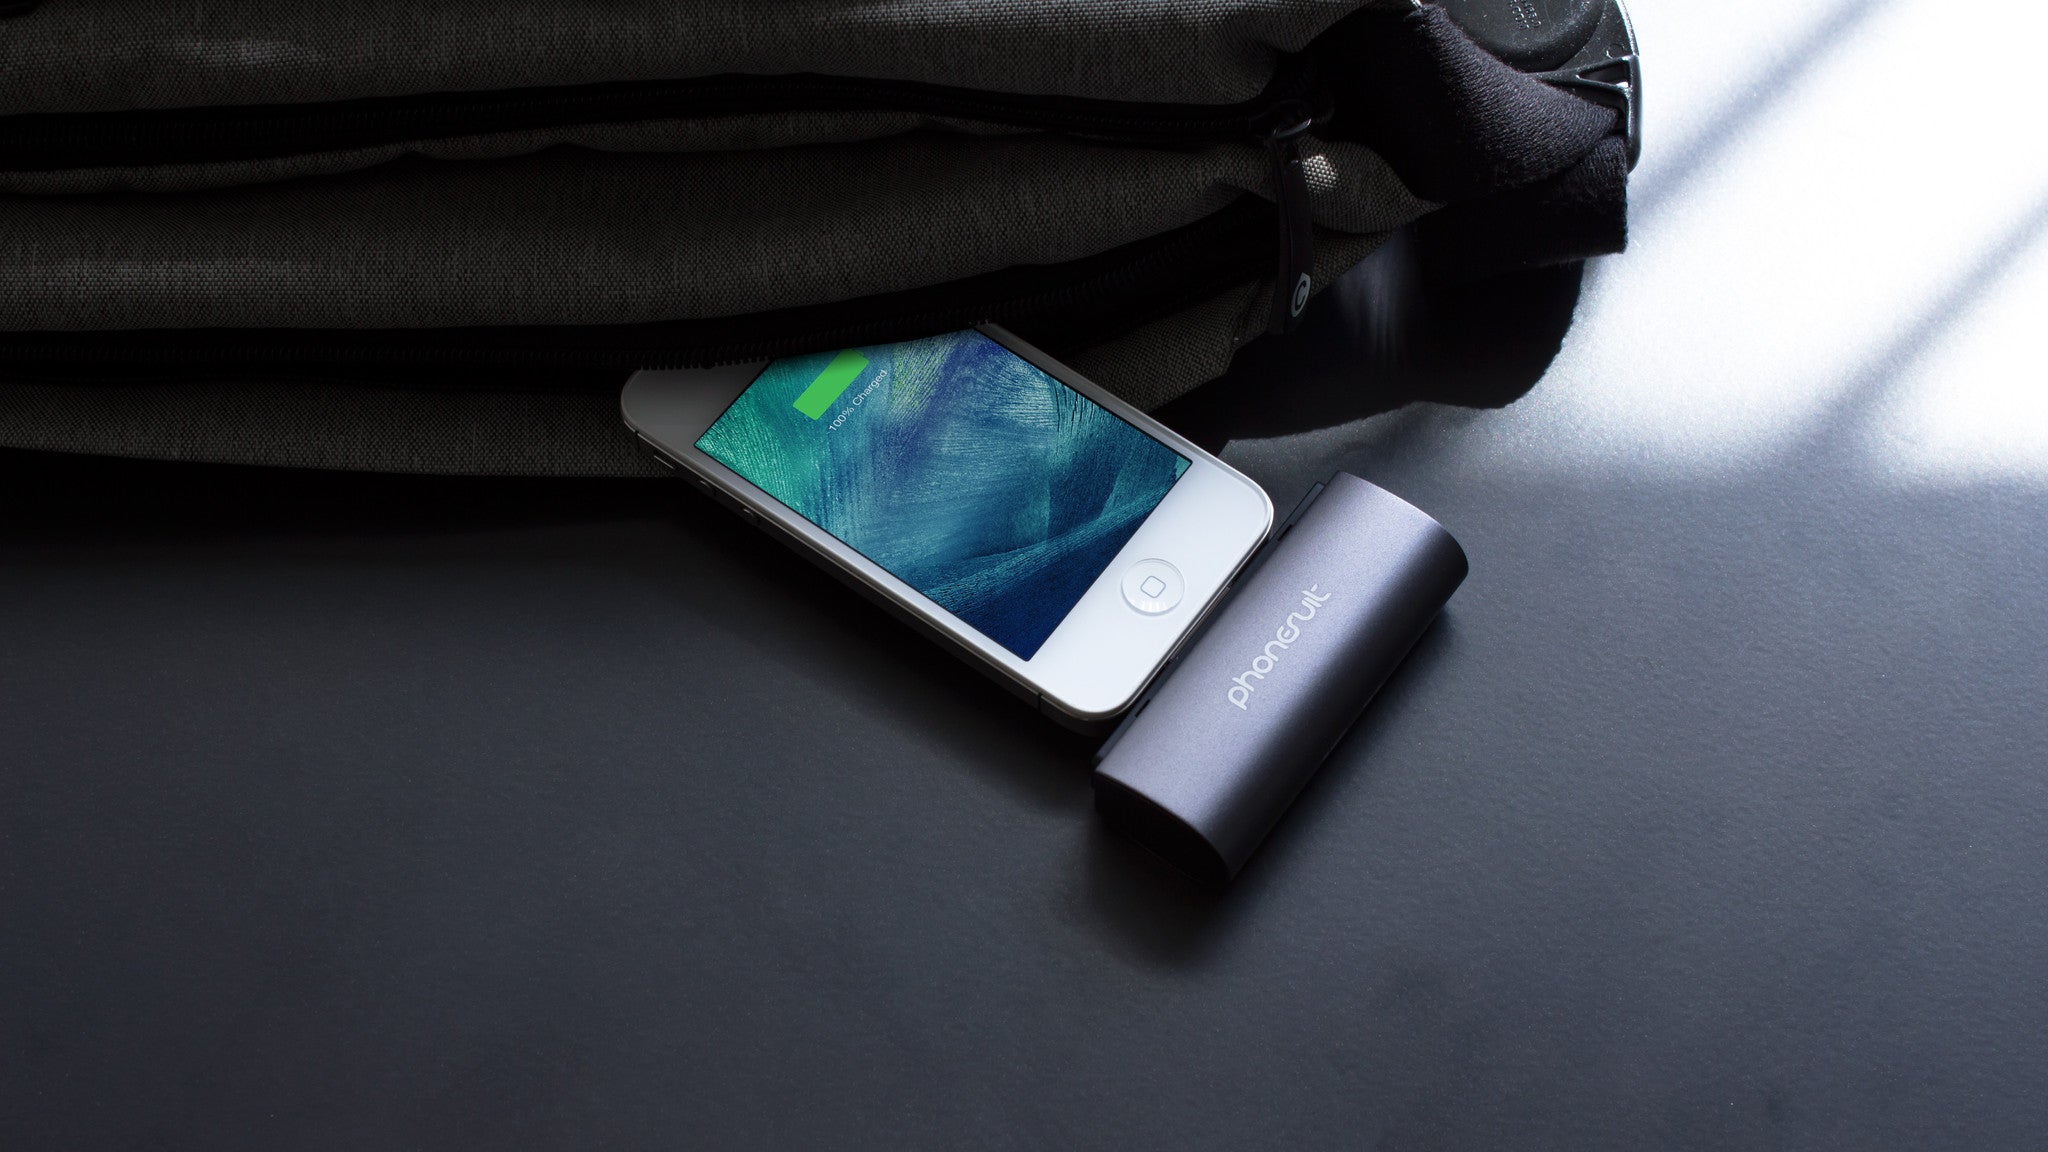 flex pocket charger charges on the go